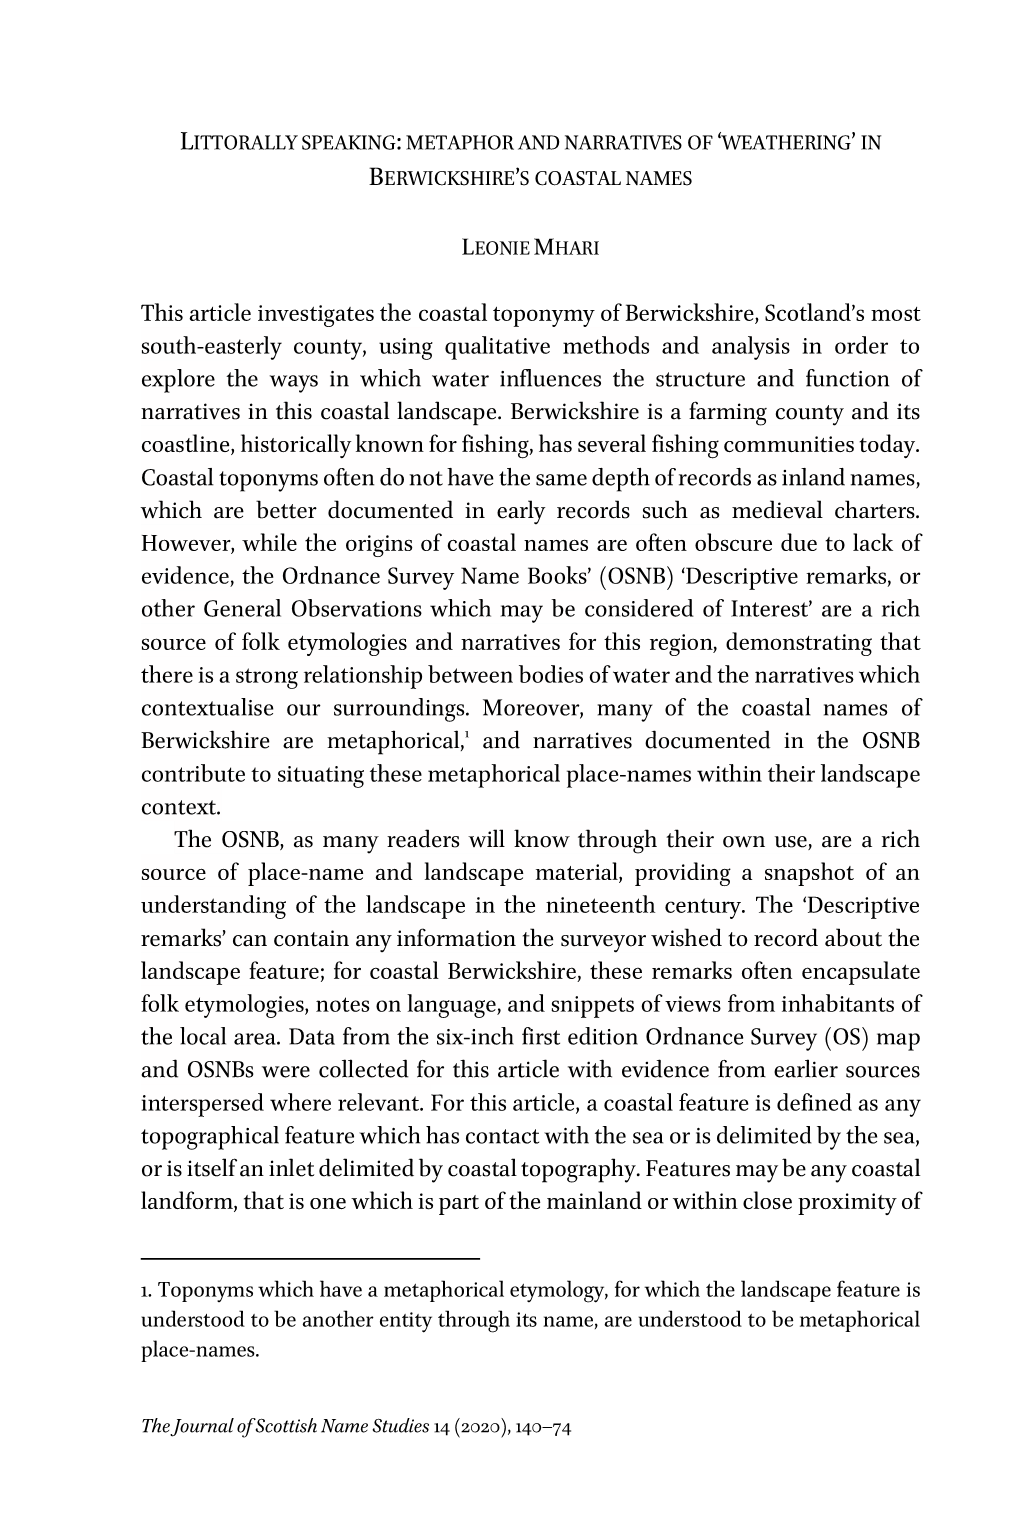 This Article Investigates the Coastal Toponymy of Berwickshire, Scotland's Most South-Easterly County, Using Qualitative Metho